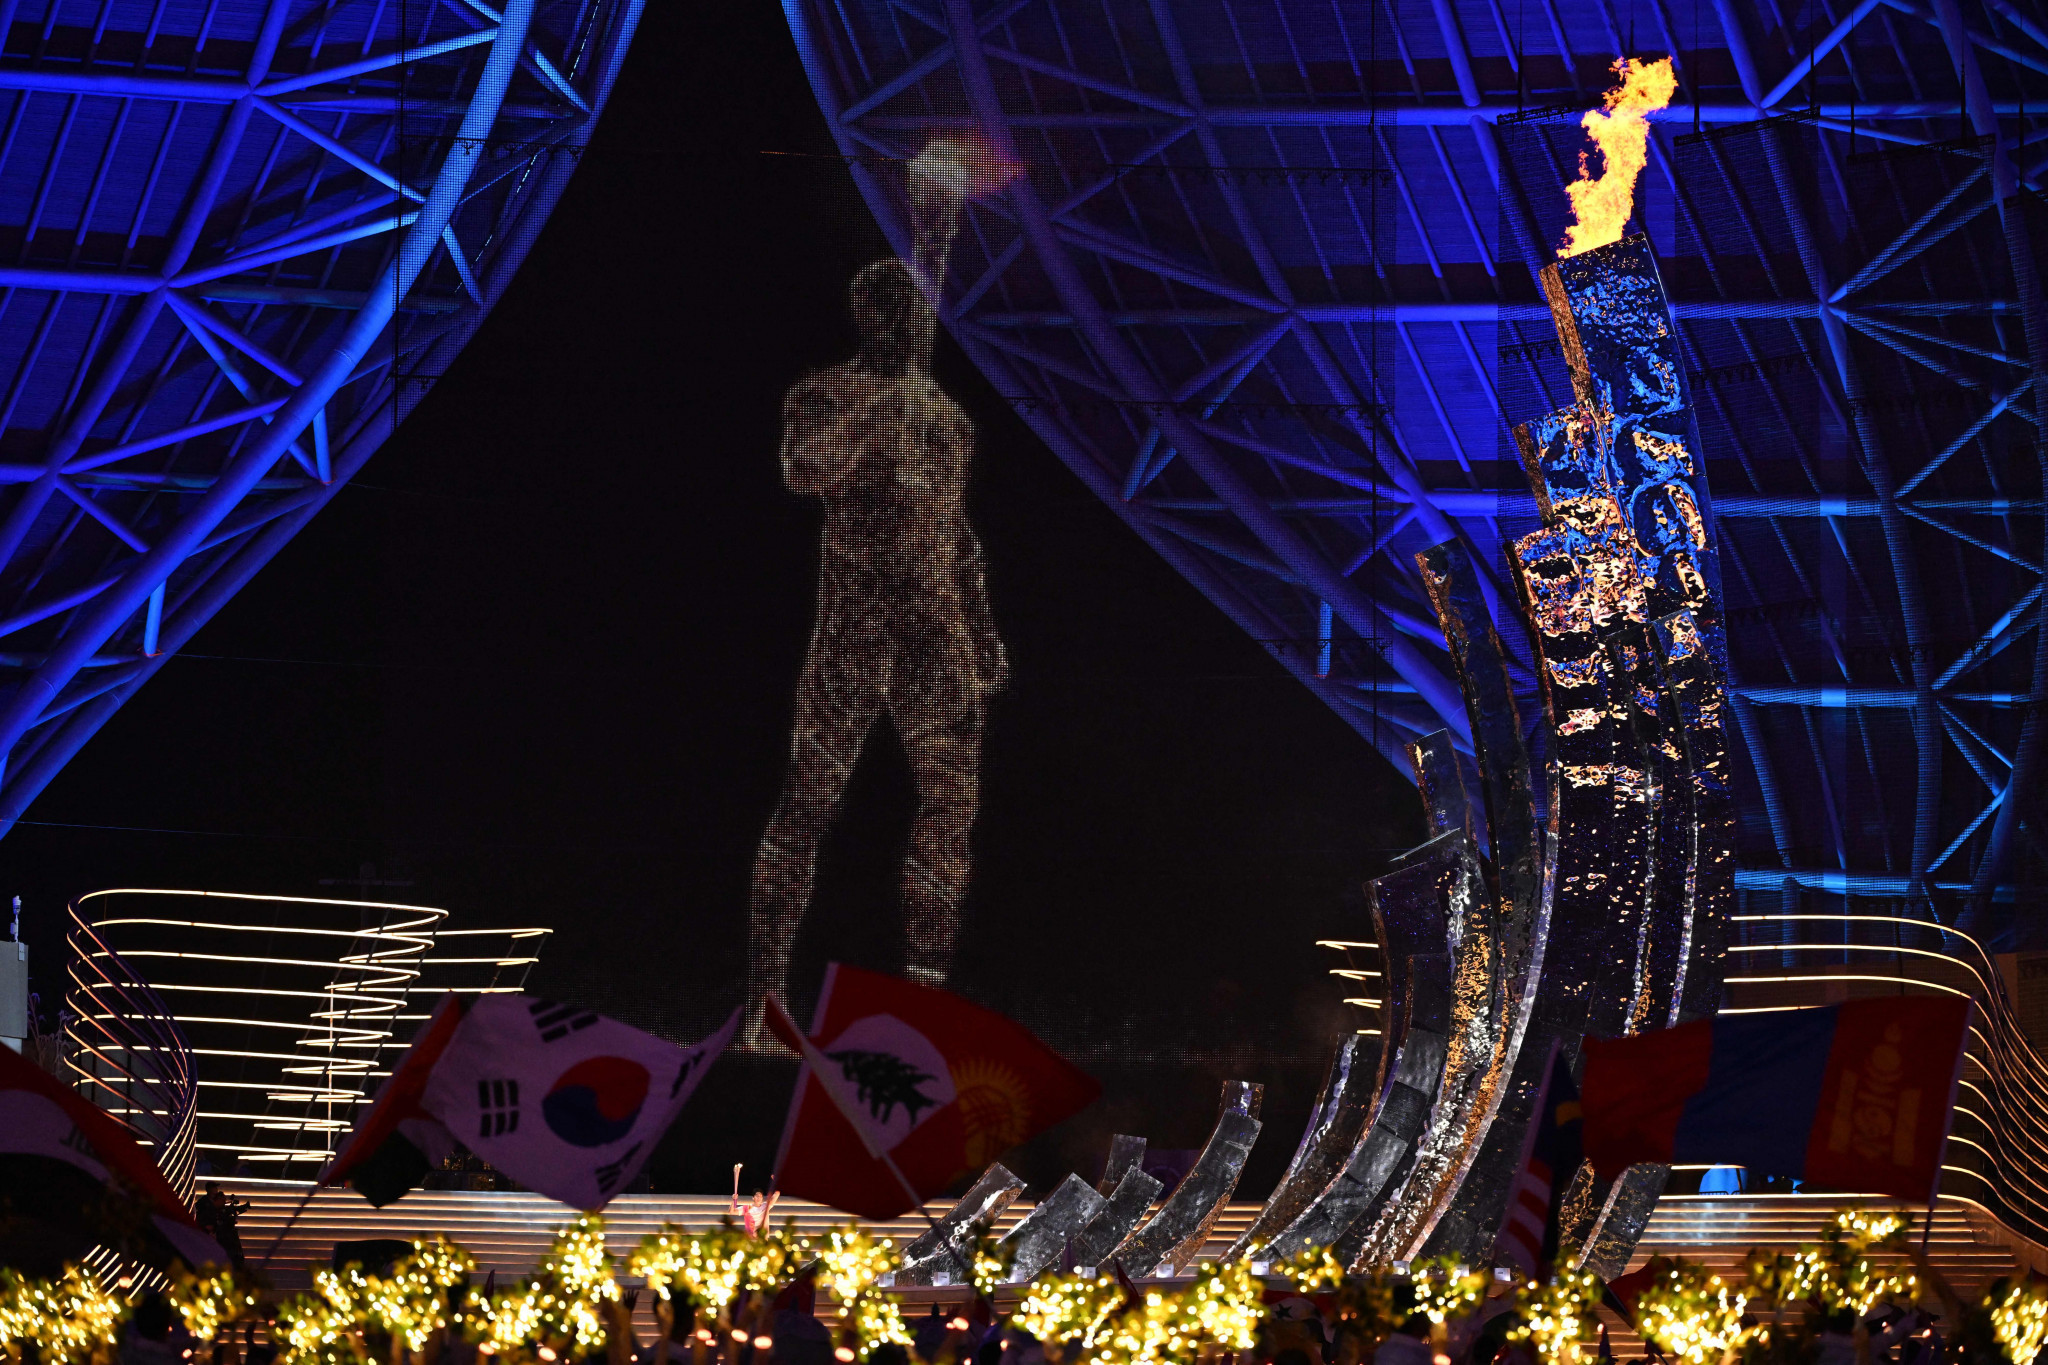 A digital Torchbearer helped to light the Cauldron at the Hangzhou 2022 Opening Ceremony ©Getty Images